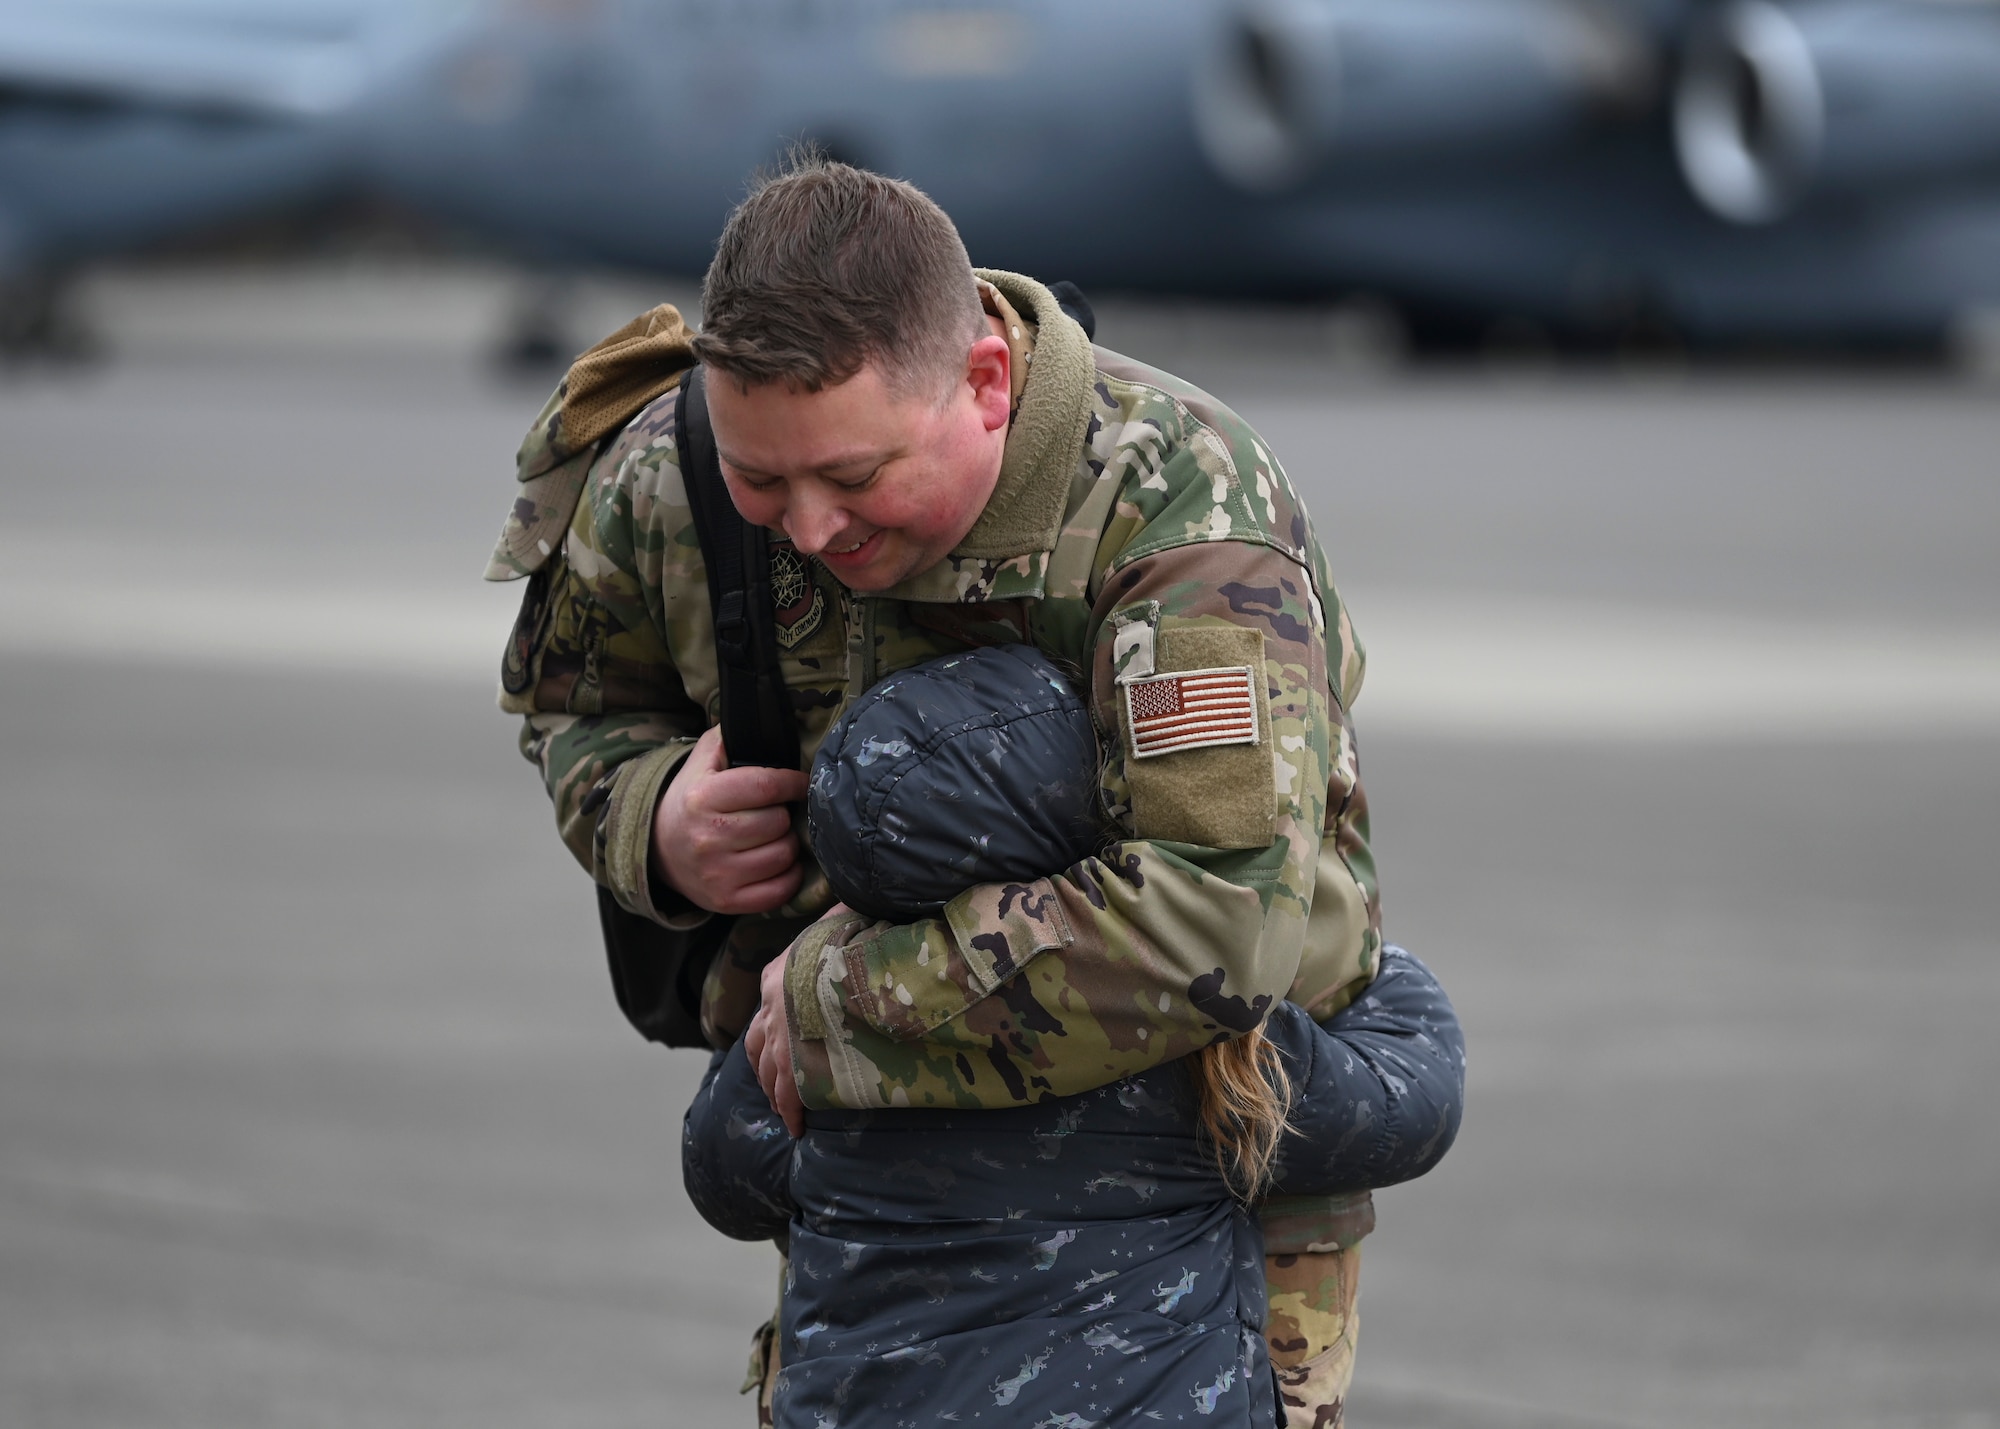 U.S. Air Force Master Sgt. Eric Pietras, loadmaster with the 8th Expeditionary Airlift Squadron, is welcomed home from a deployment by a loved one at Joint Base Lewis-McChord, Washington, April 4, 2023. This deployment was the 62d Airlift Wing’s first under the new Air Force Force Generation Model in support of U.S. Central Command, U.S. European Command and U.S. Africa Command operations. The new AFFORGEN model aims to reconstitute Air Mobility Command’s manpower, aircraft and equipment into force elements that train, deploy and recover as cohesive units throughout each phase of the cycle. (U.S. Air Force photo by Senior Airman Callie Norton)